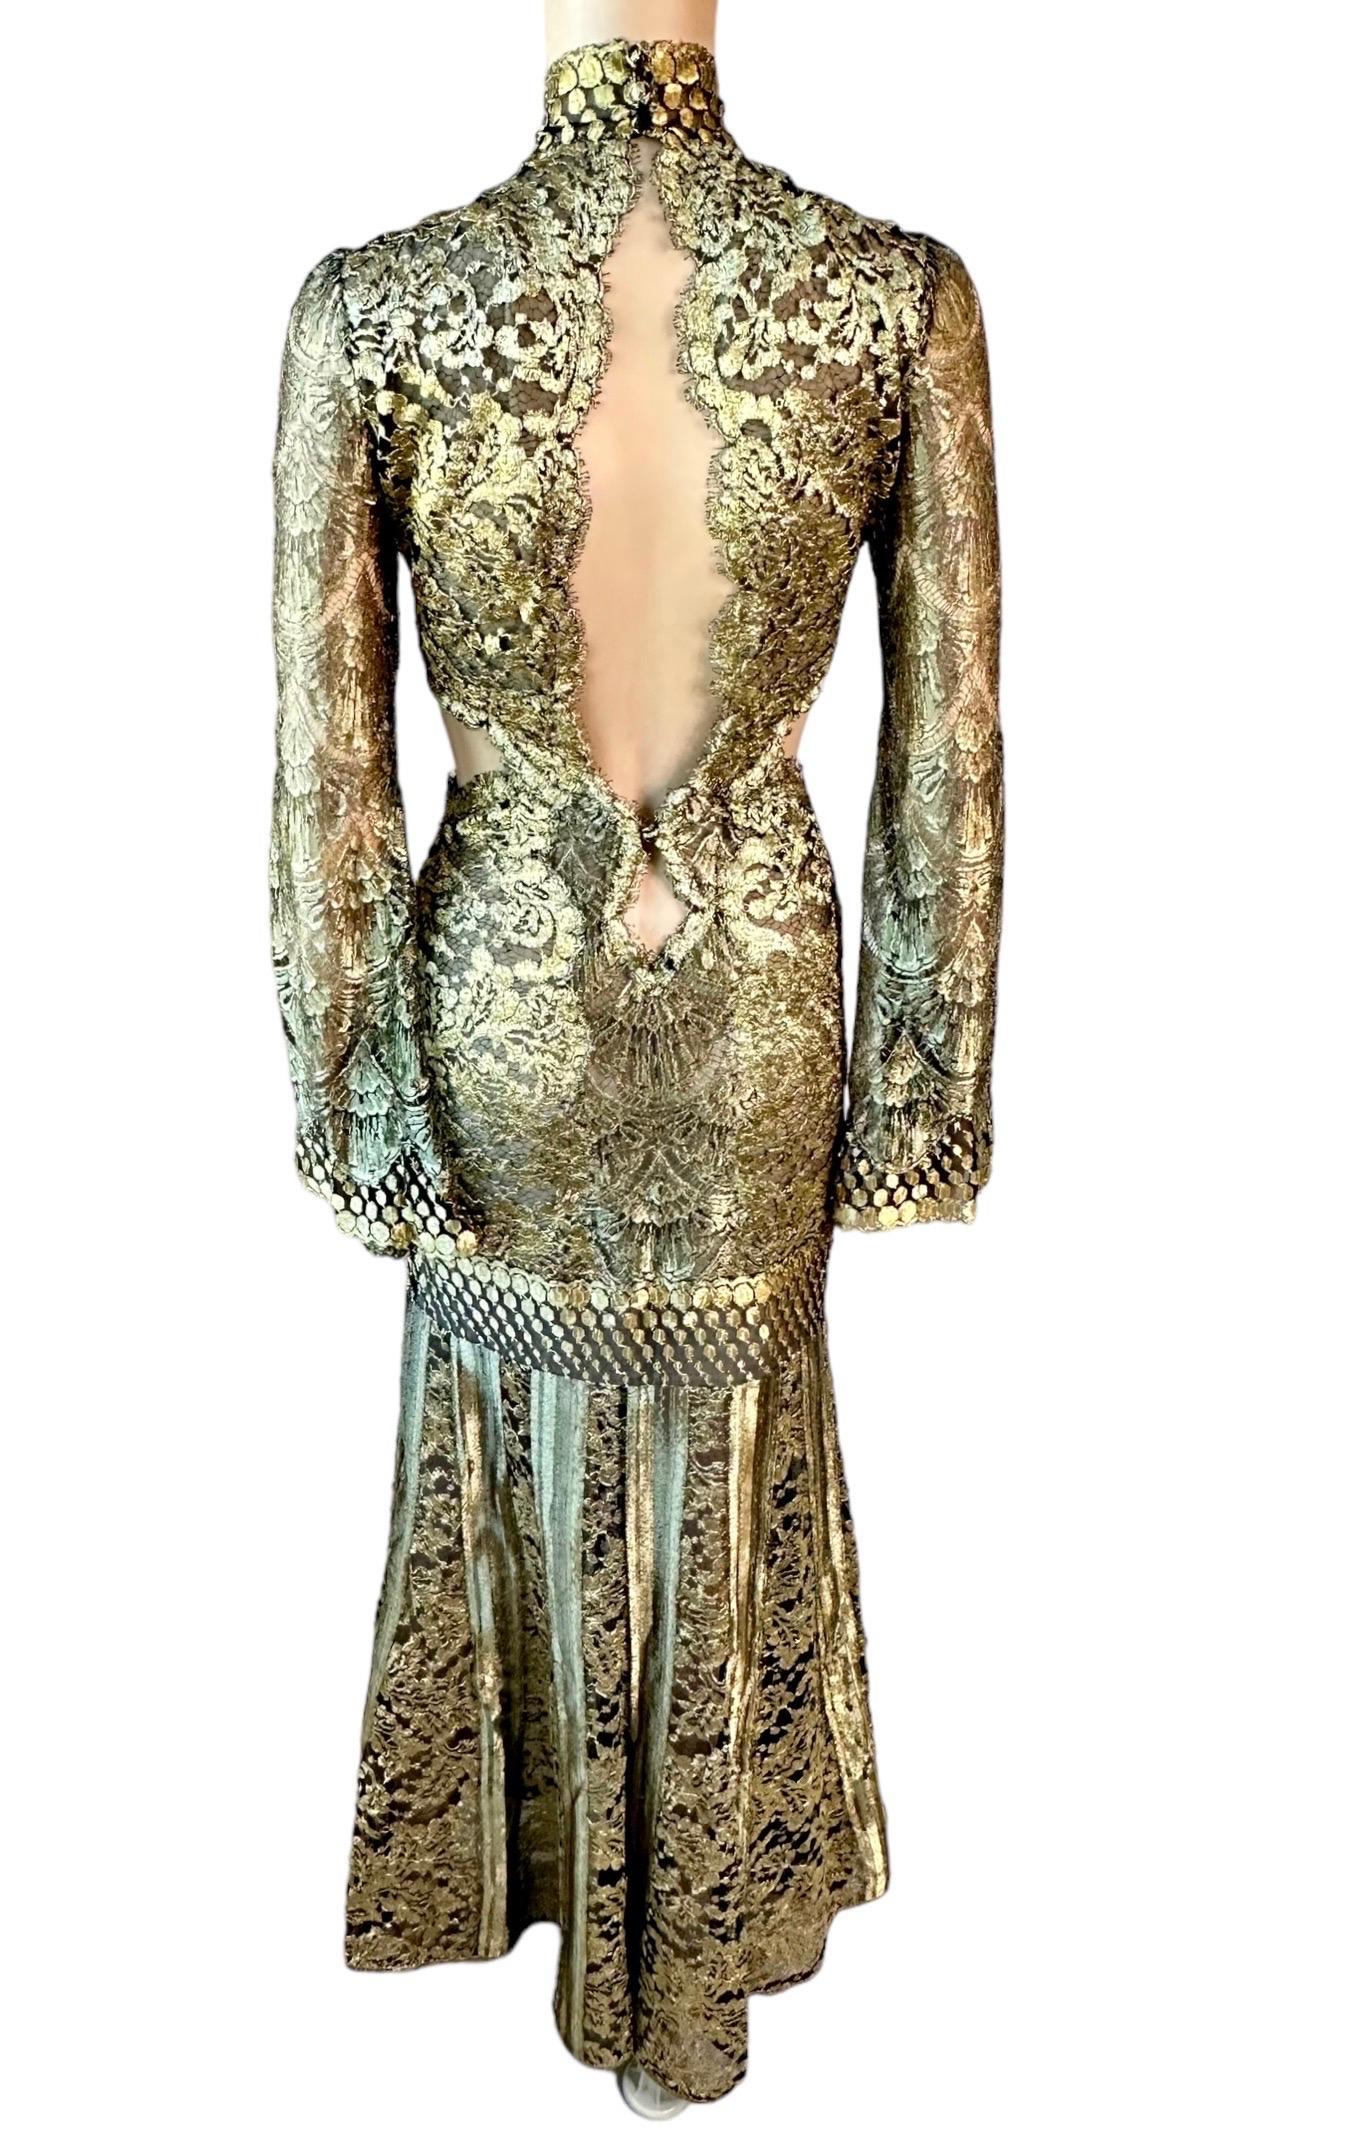 Roberto Cavalli F/W 2016 Runway Gold Sheer Lace Evening Dress Gown For Sale 1